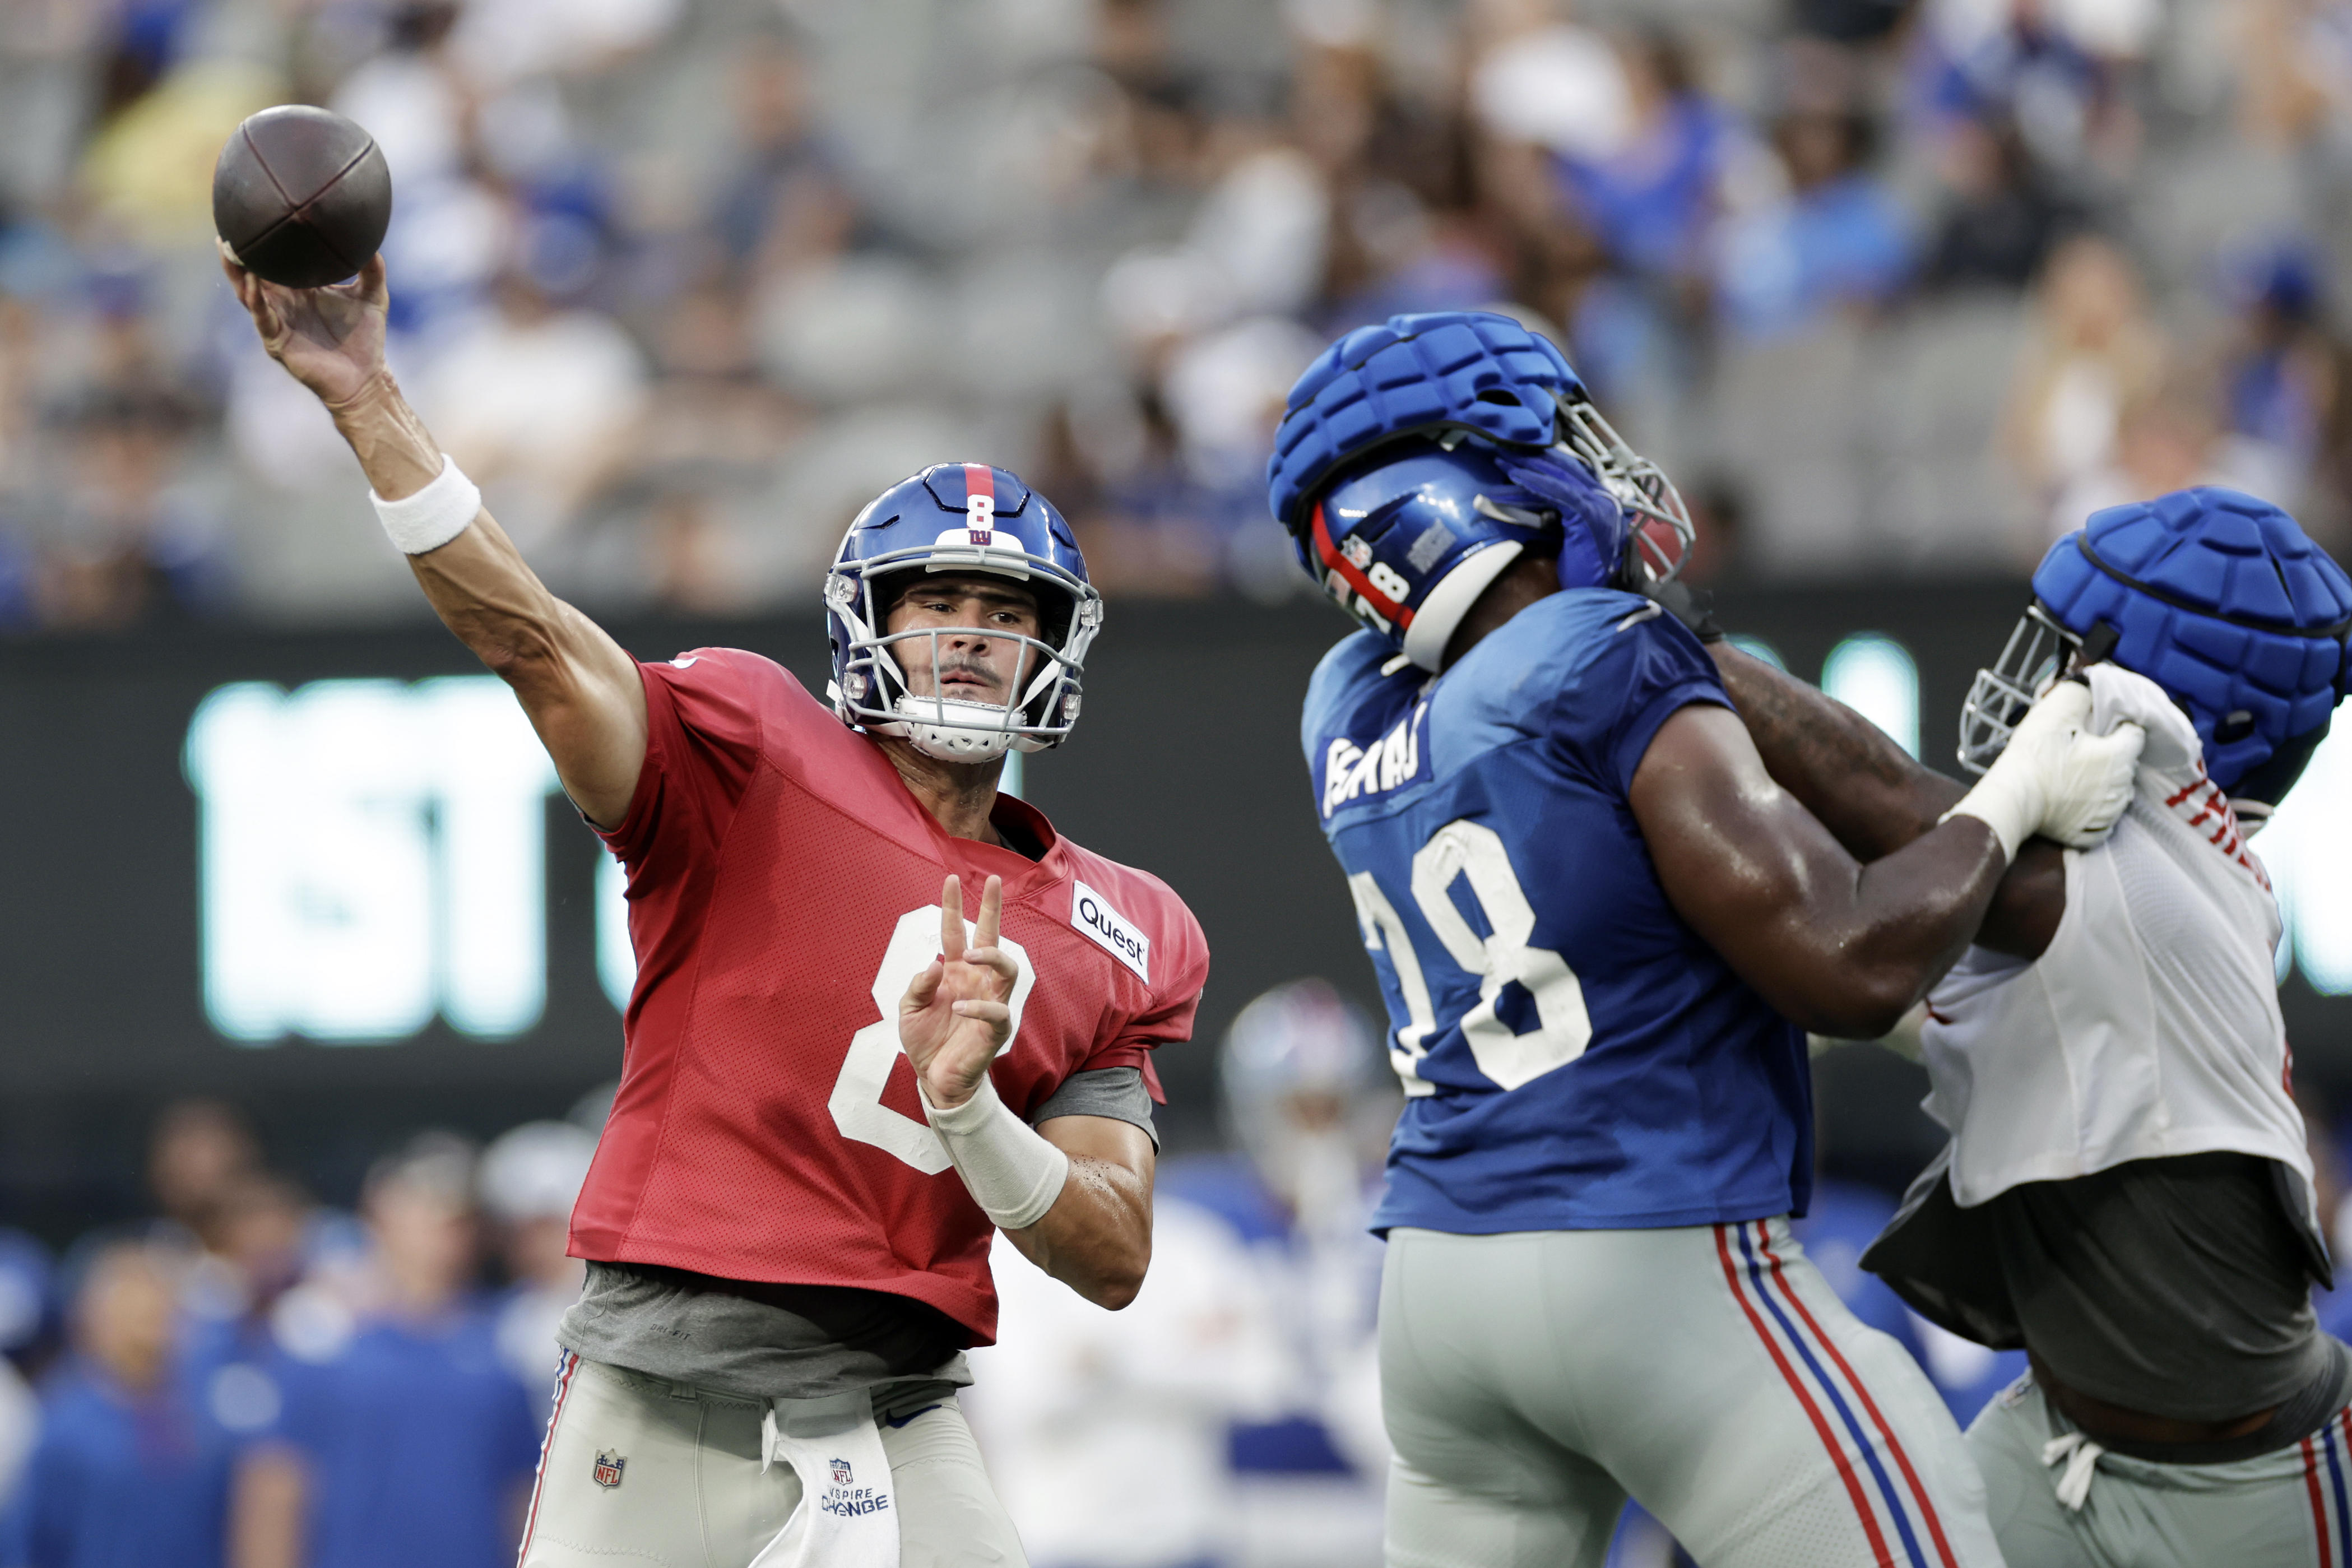 Game Preview: Patriots at Giants